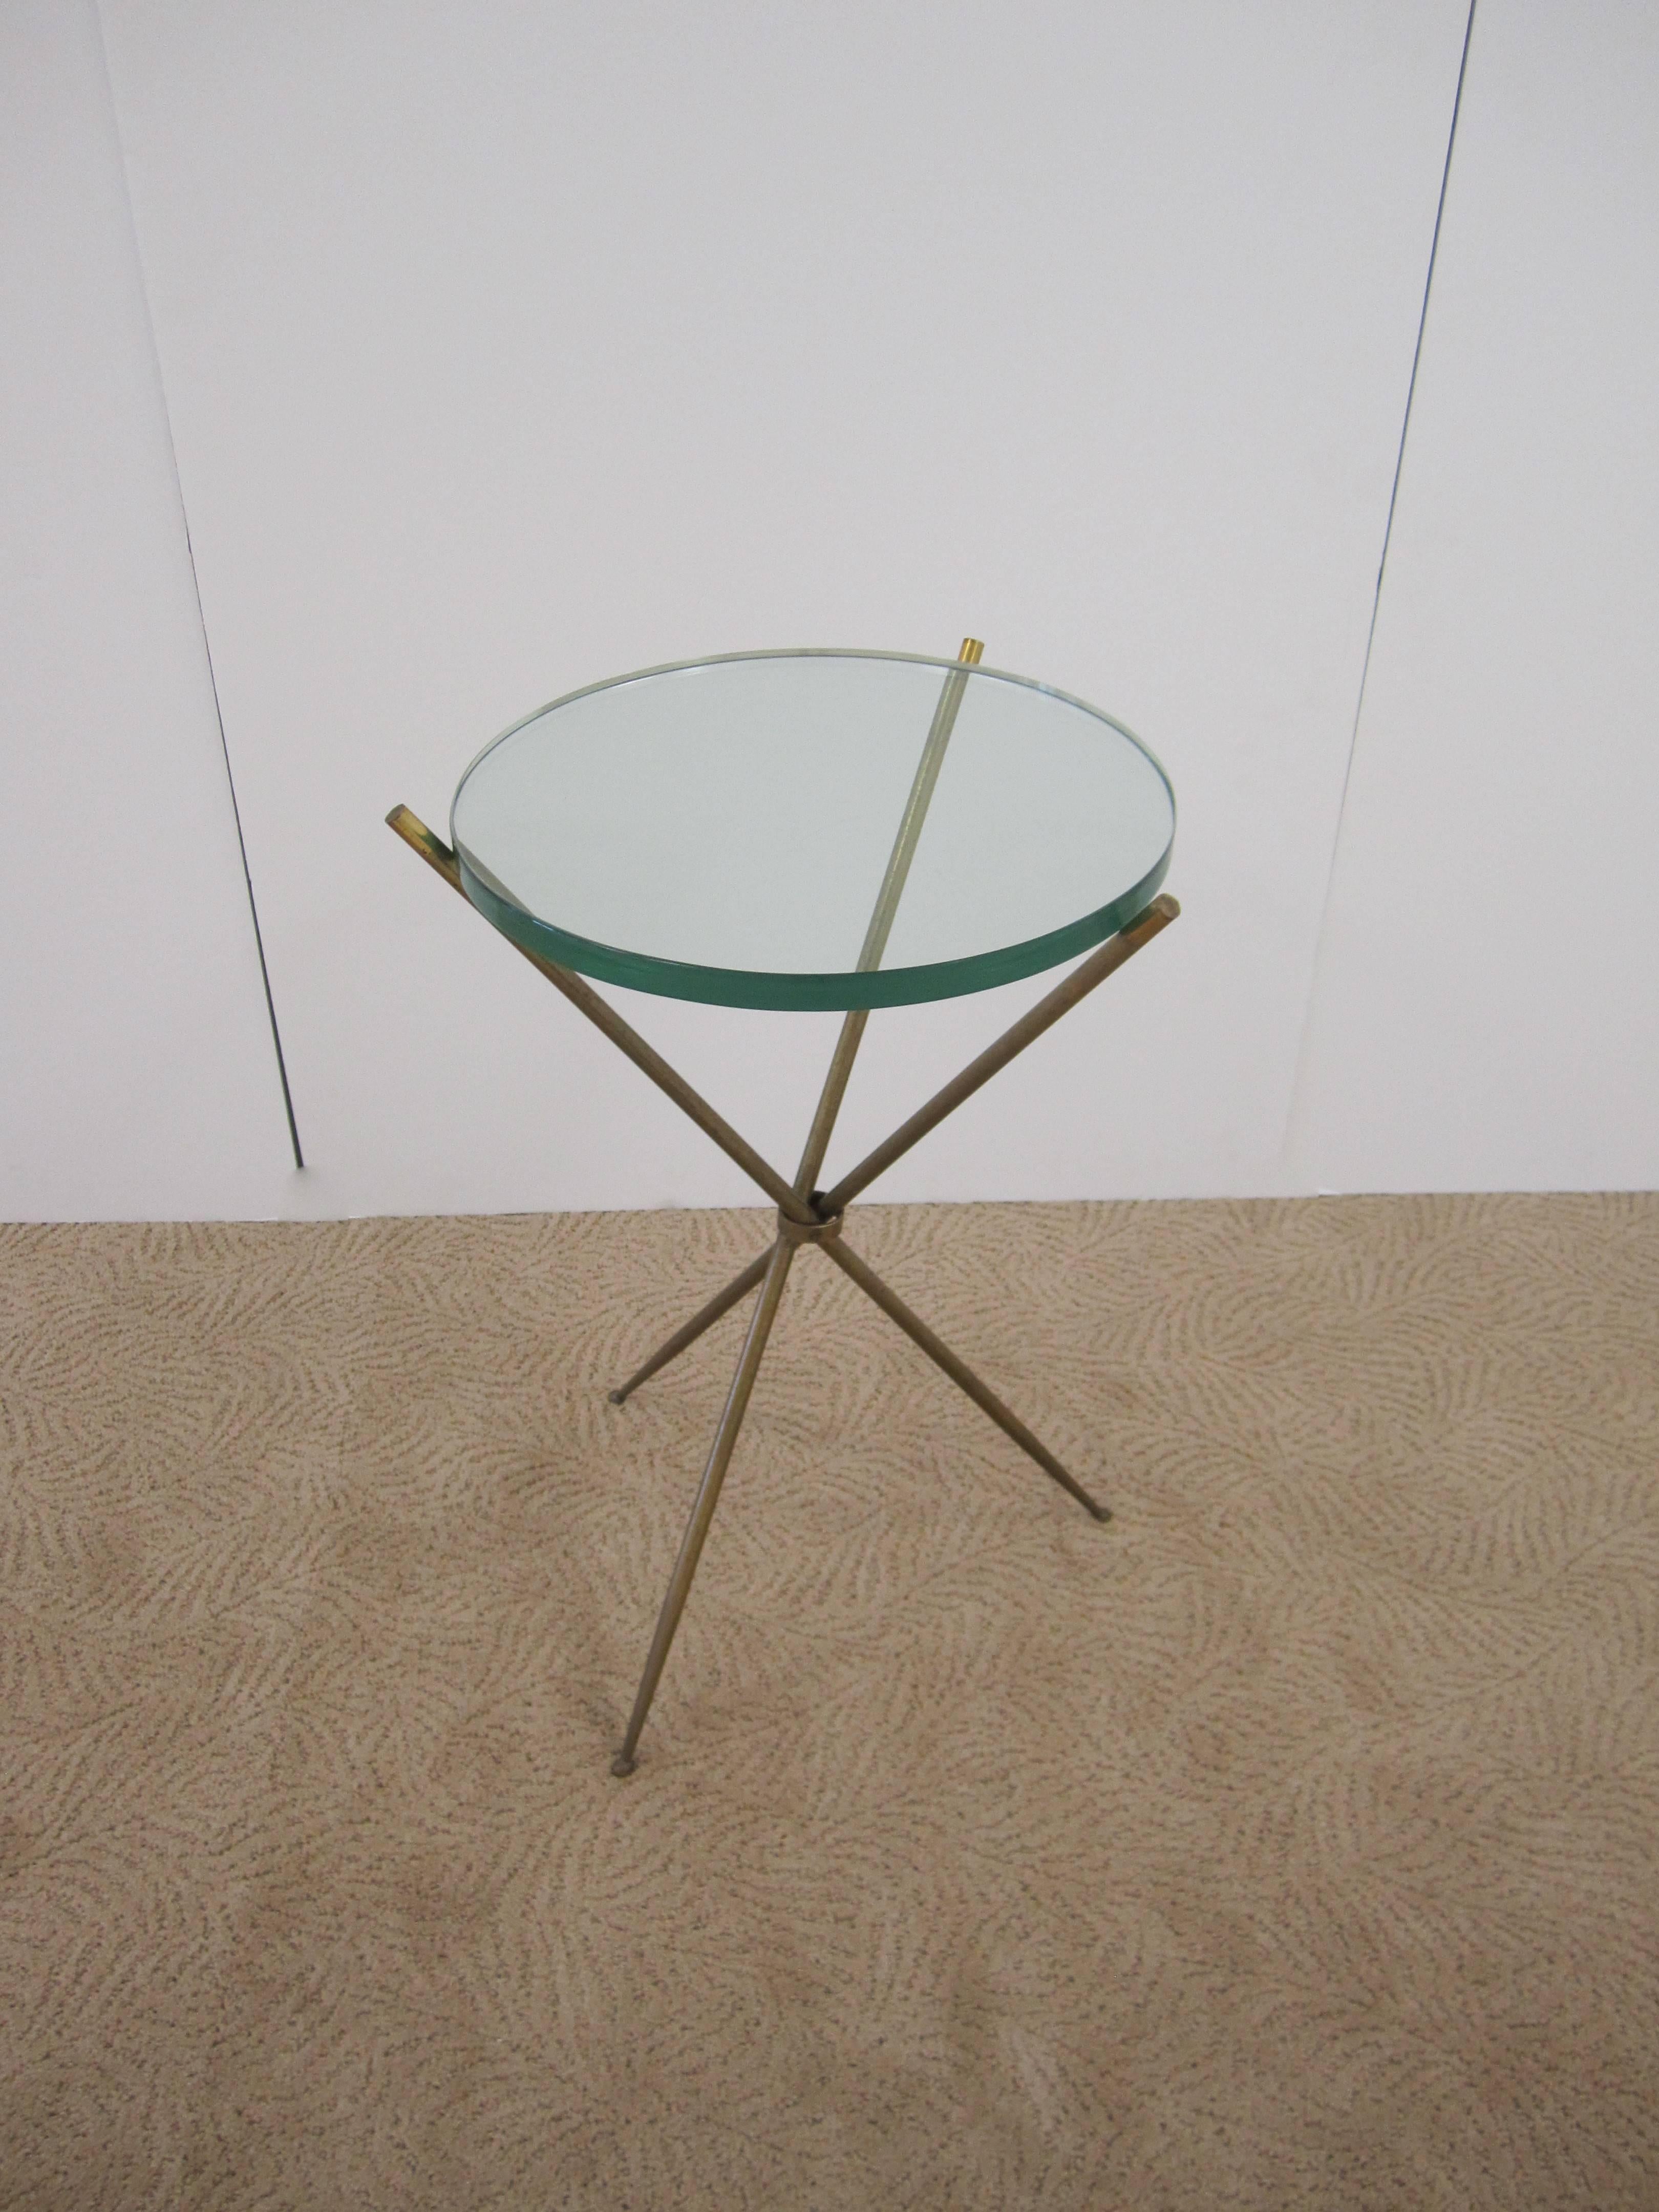 Mid-20th Century Vintage Modern Italian Brass and Glass Tripod Side Table after Gio Ponti, Italy